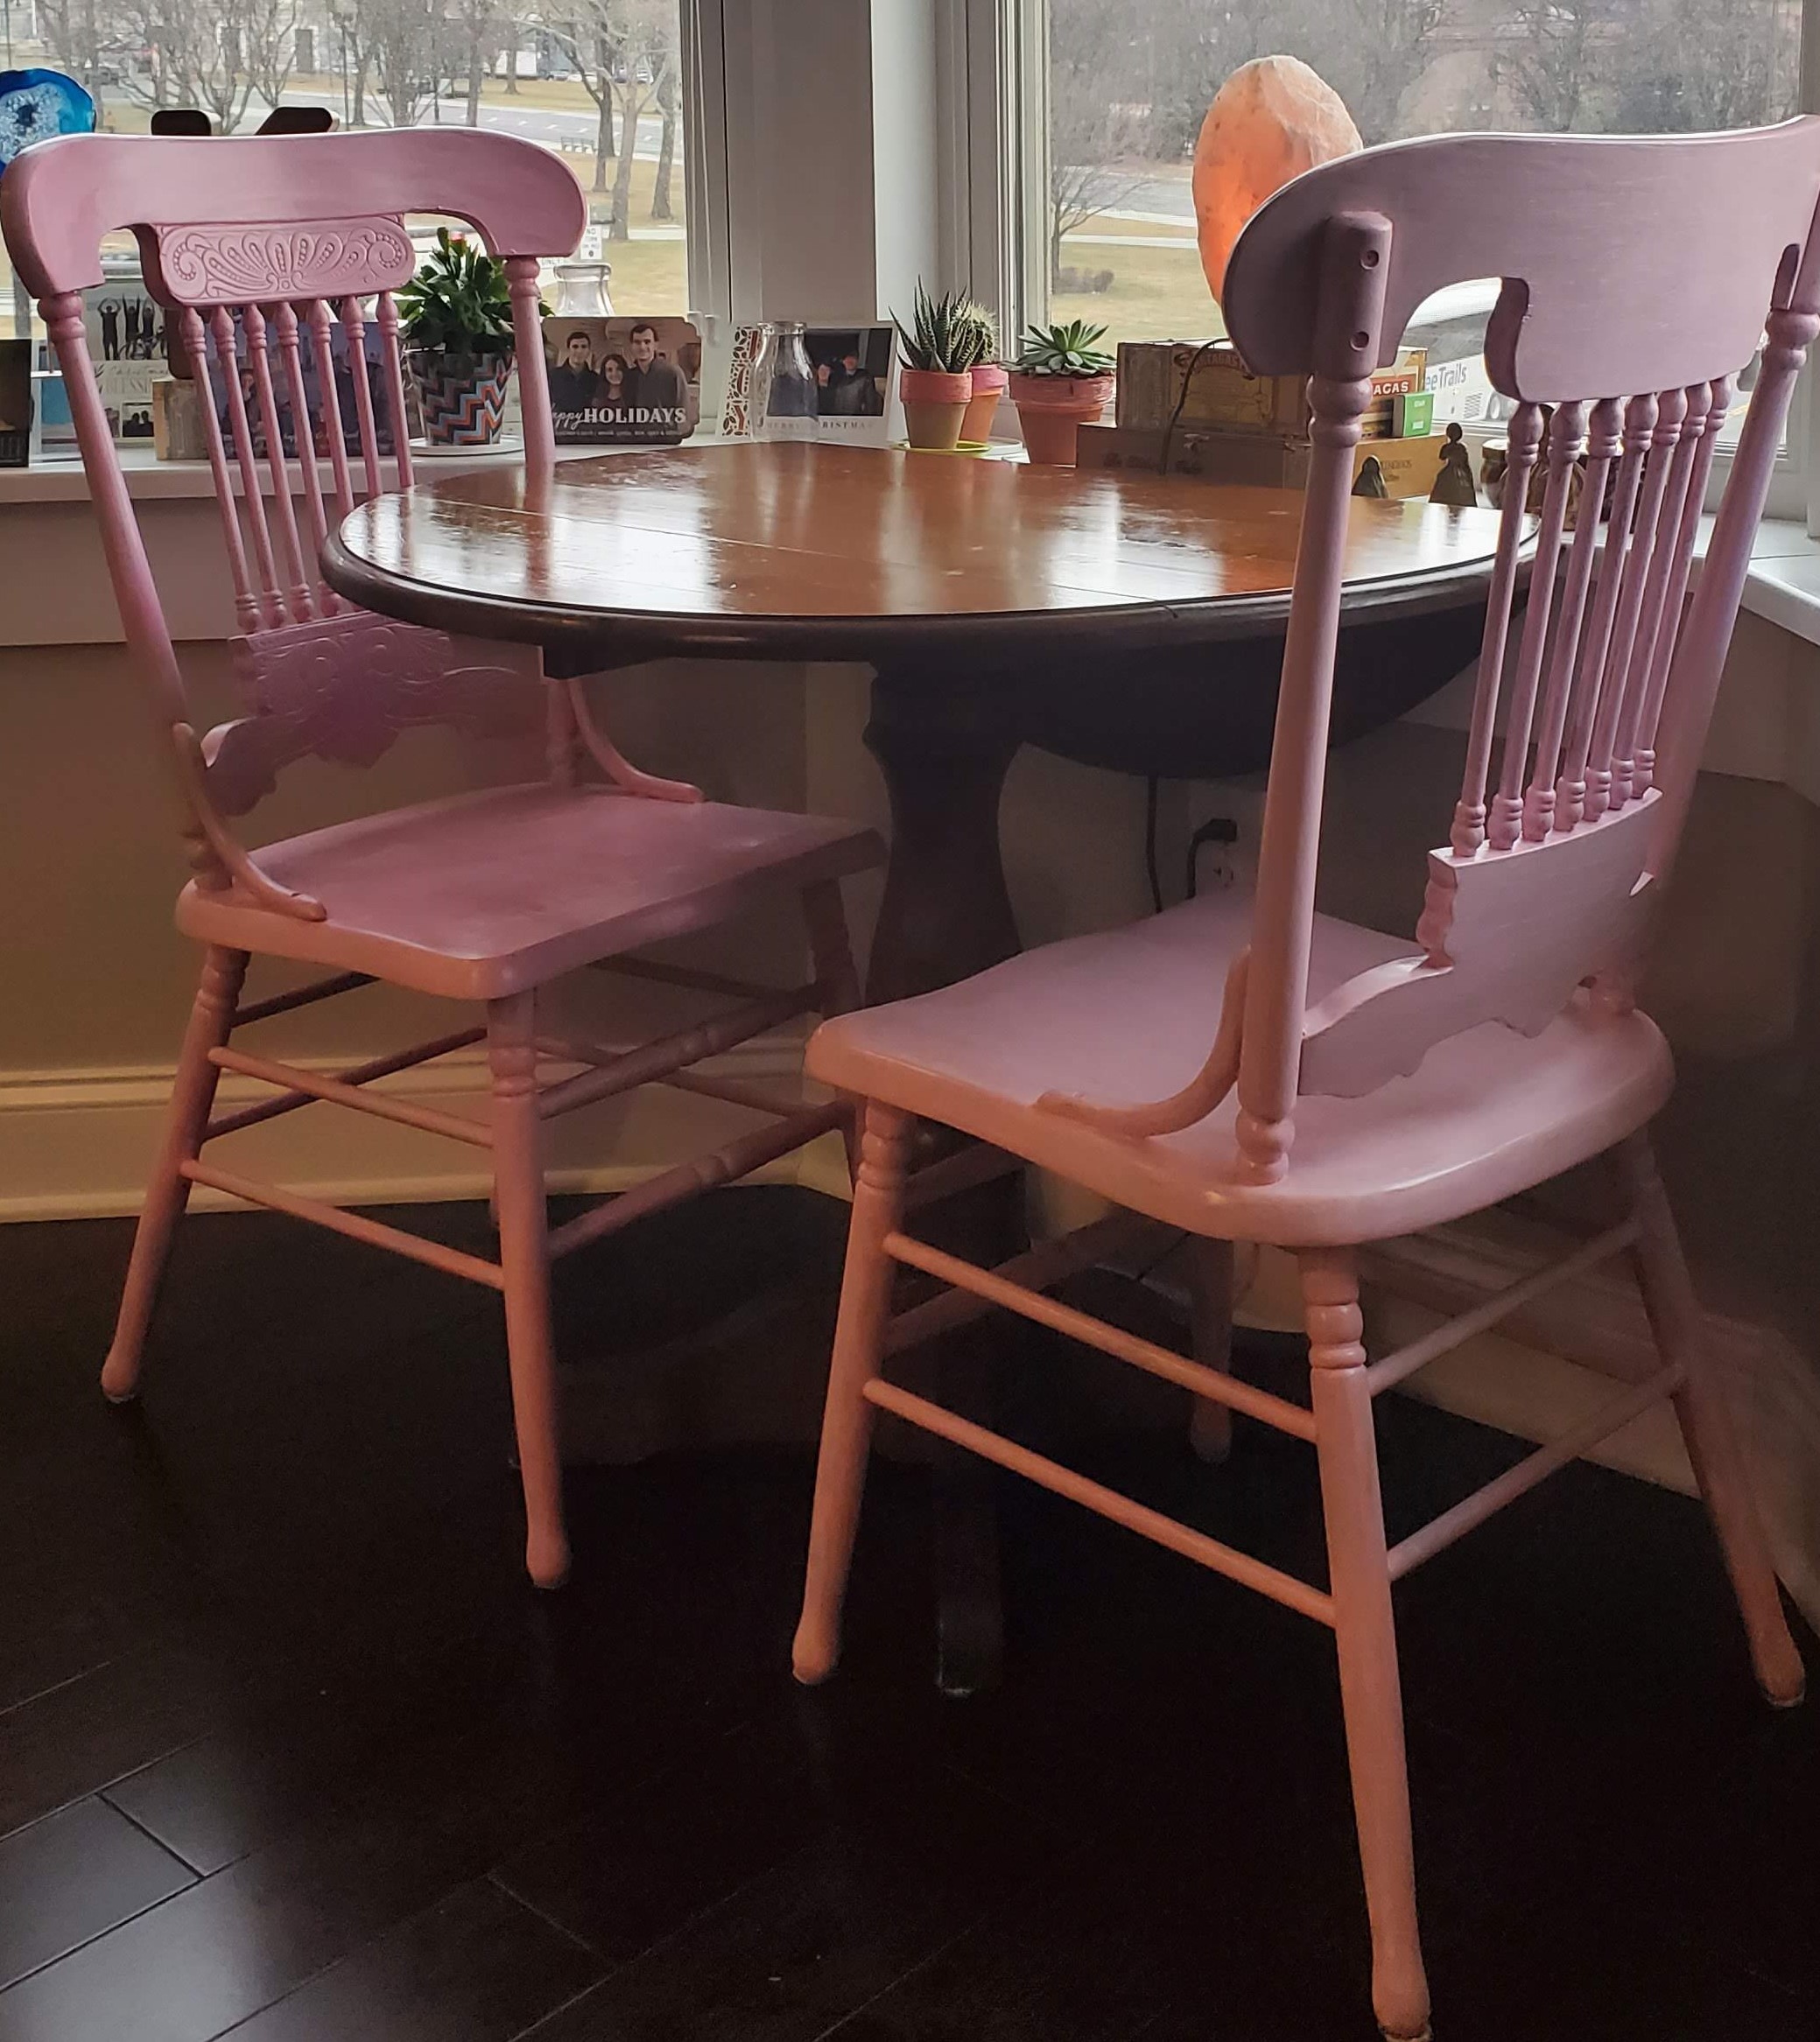 Pink Kitchen chairs are my new reality.